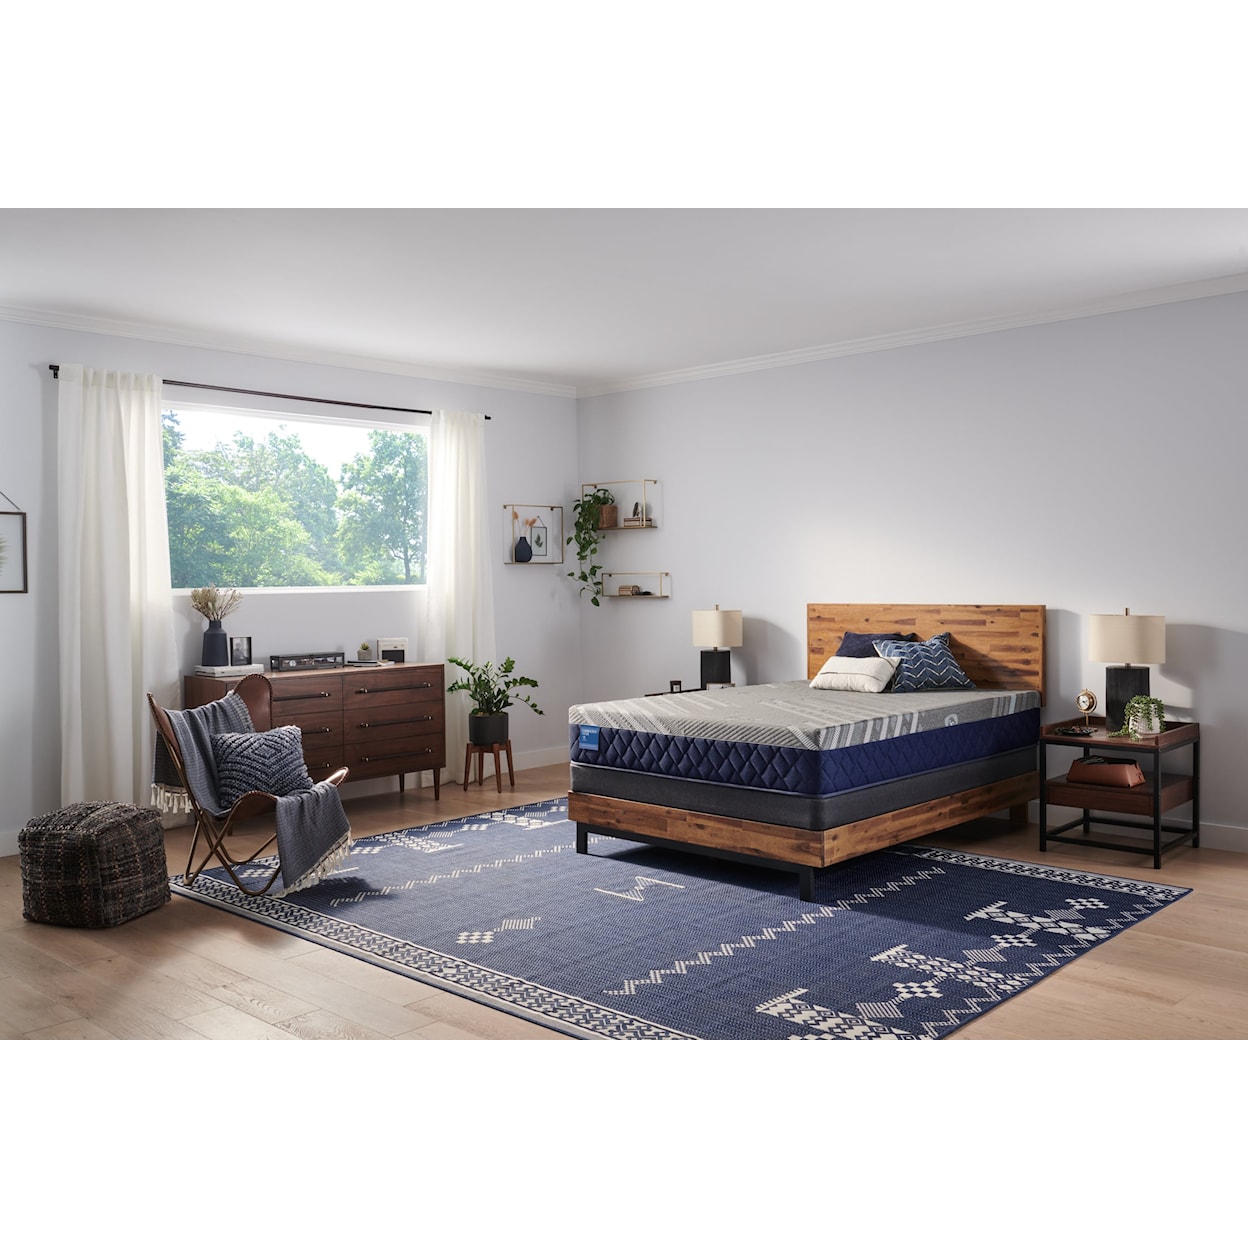 Sealy Carrington Chase H4 Firm Double Mattress